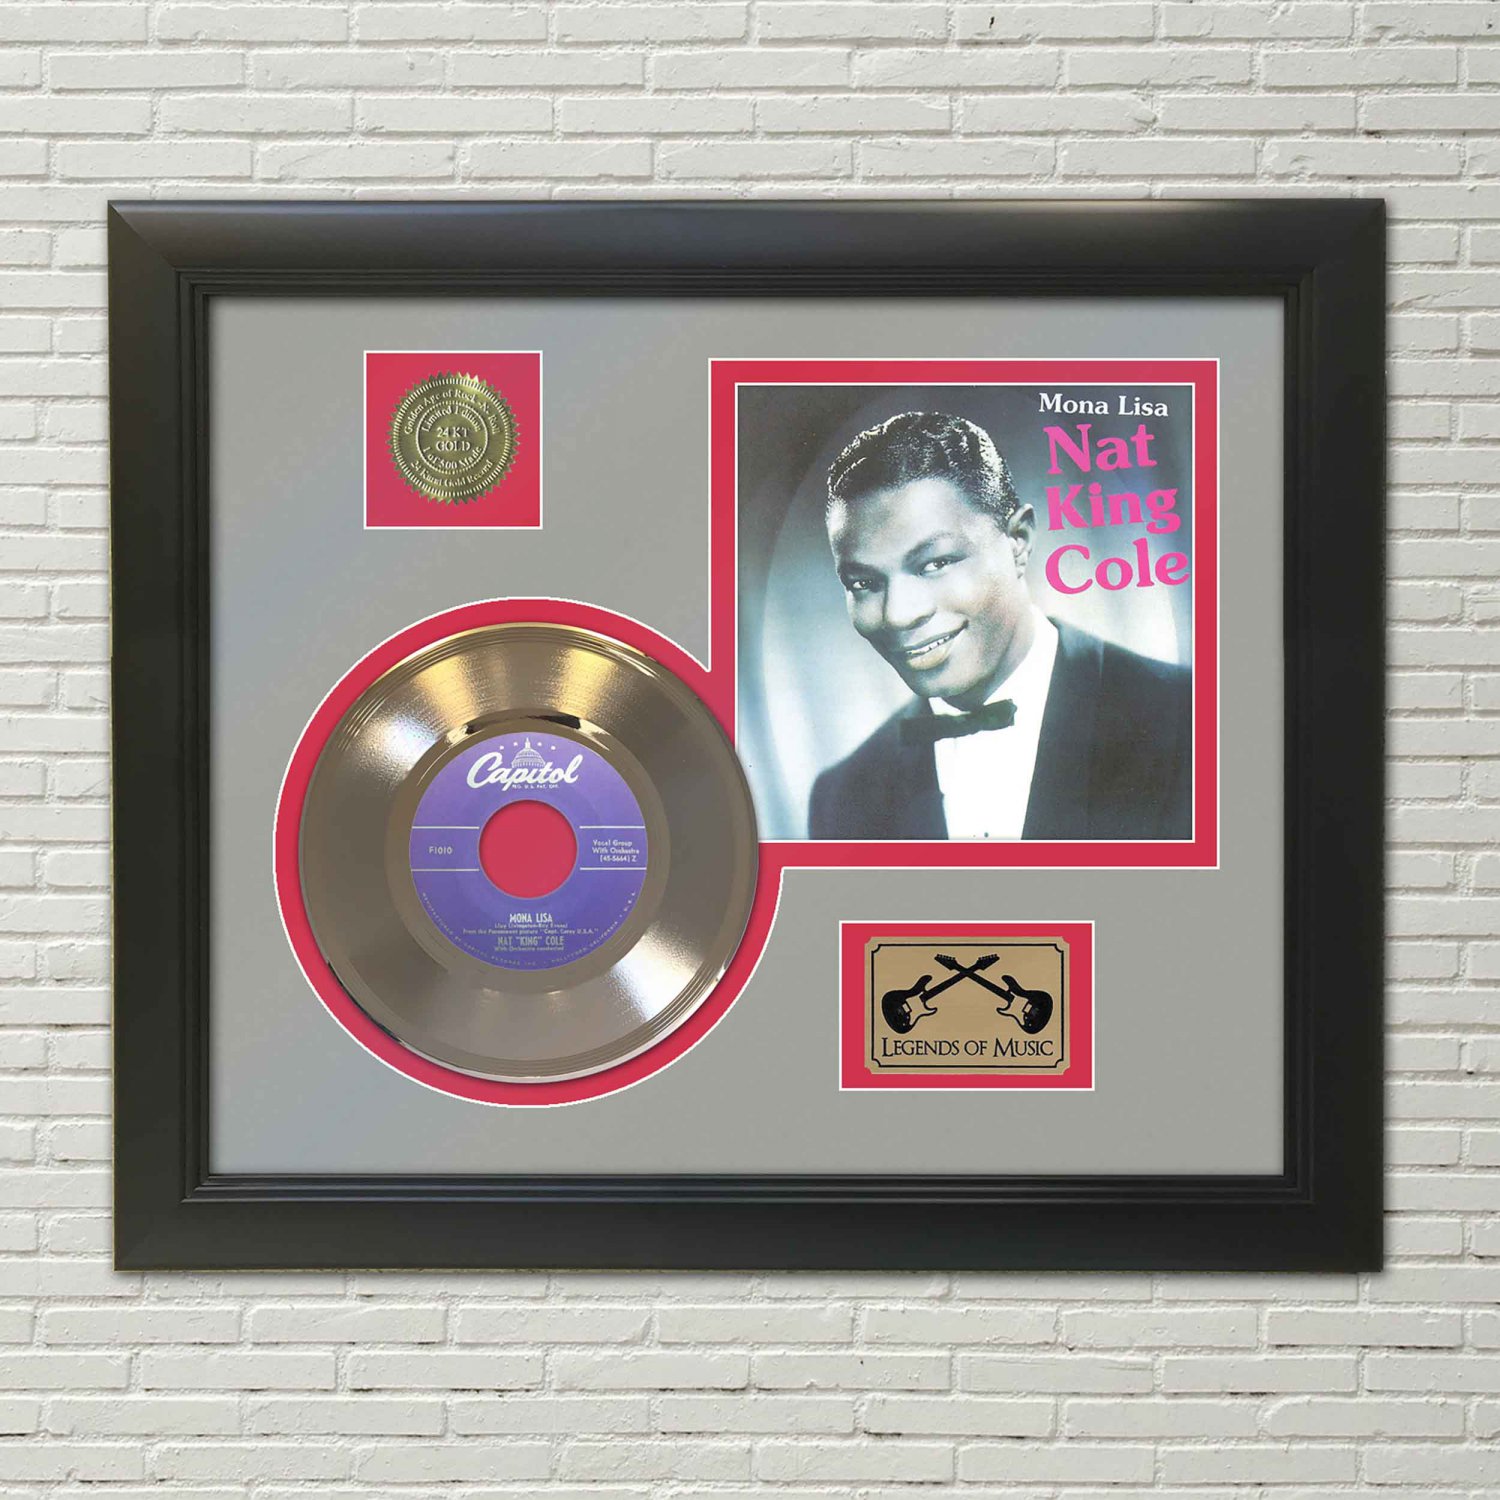 NAT KING COLE "Mona Lisa"  Framed Picture Sleeve Gold 45 Record Display